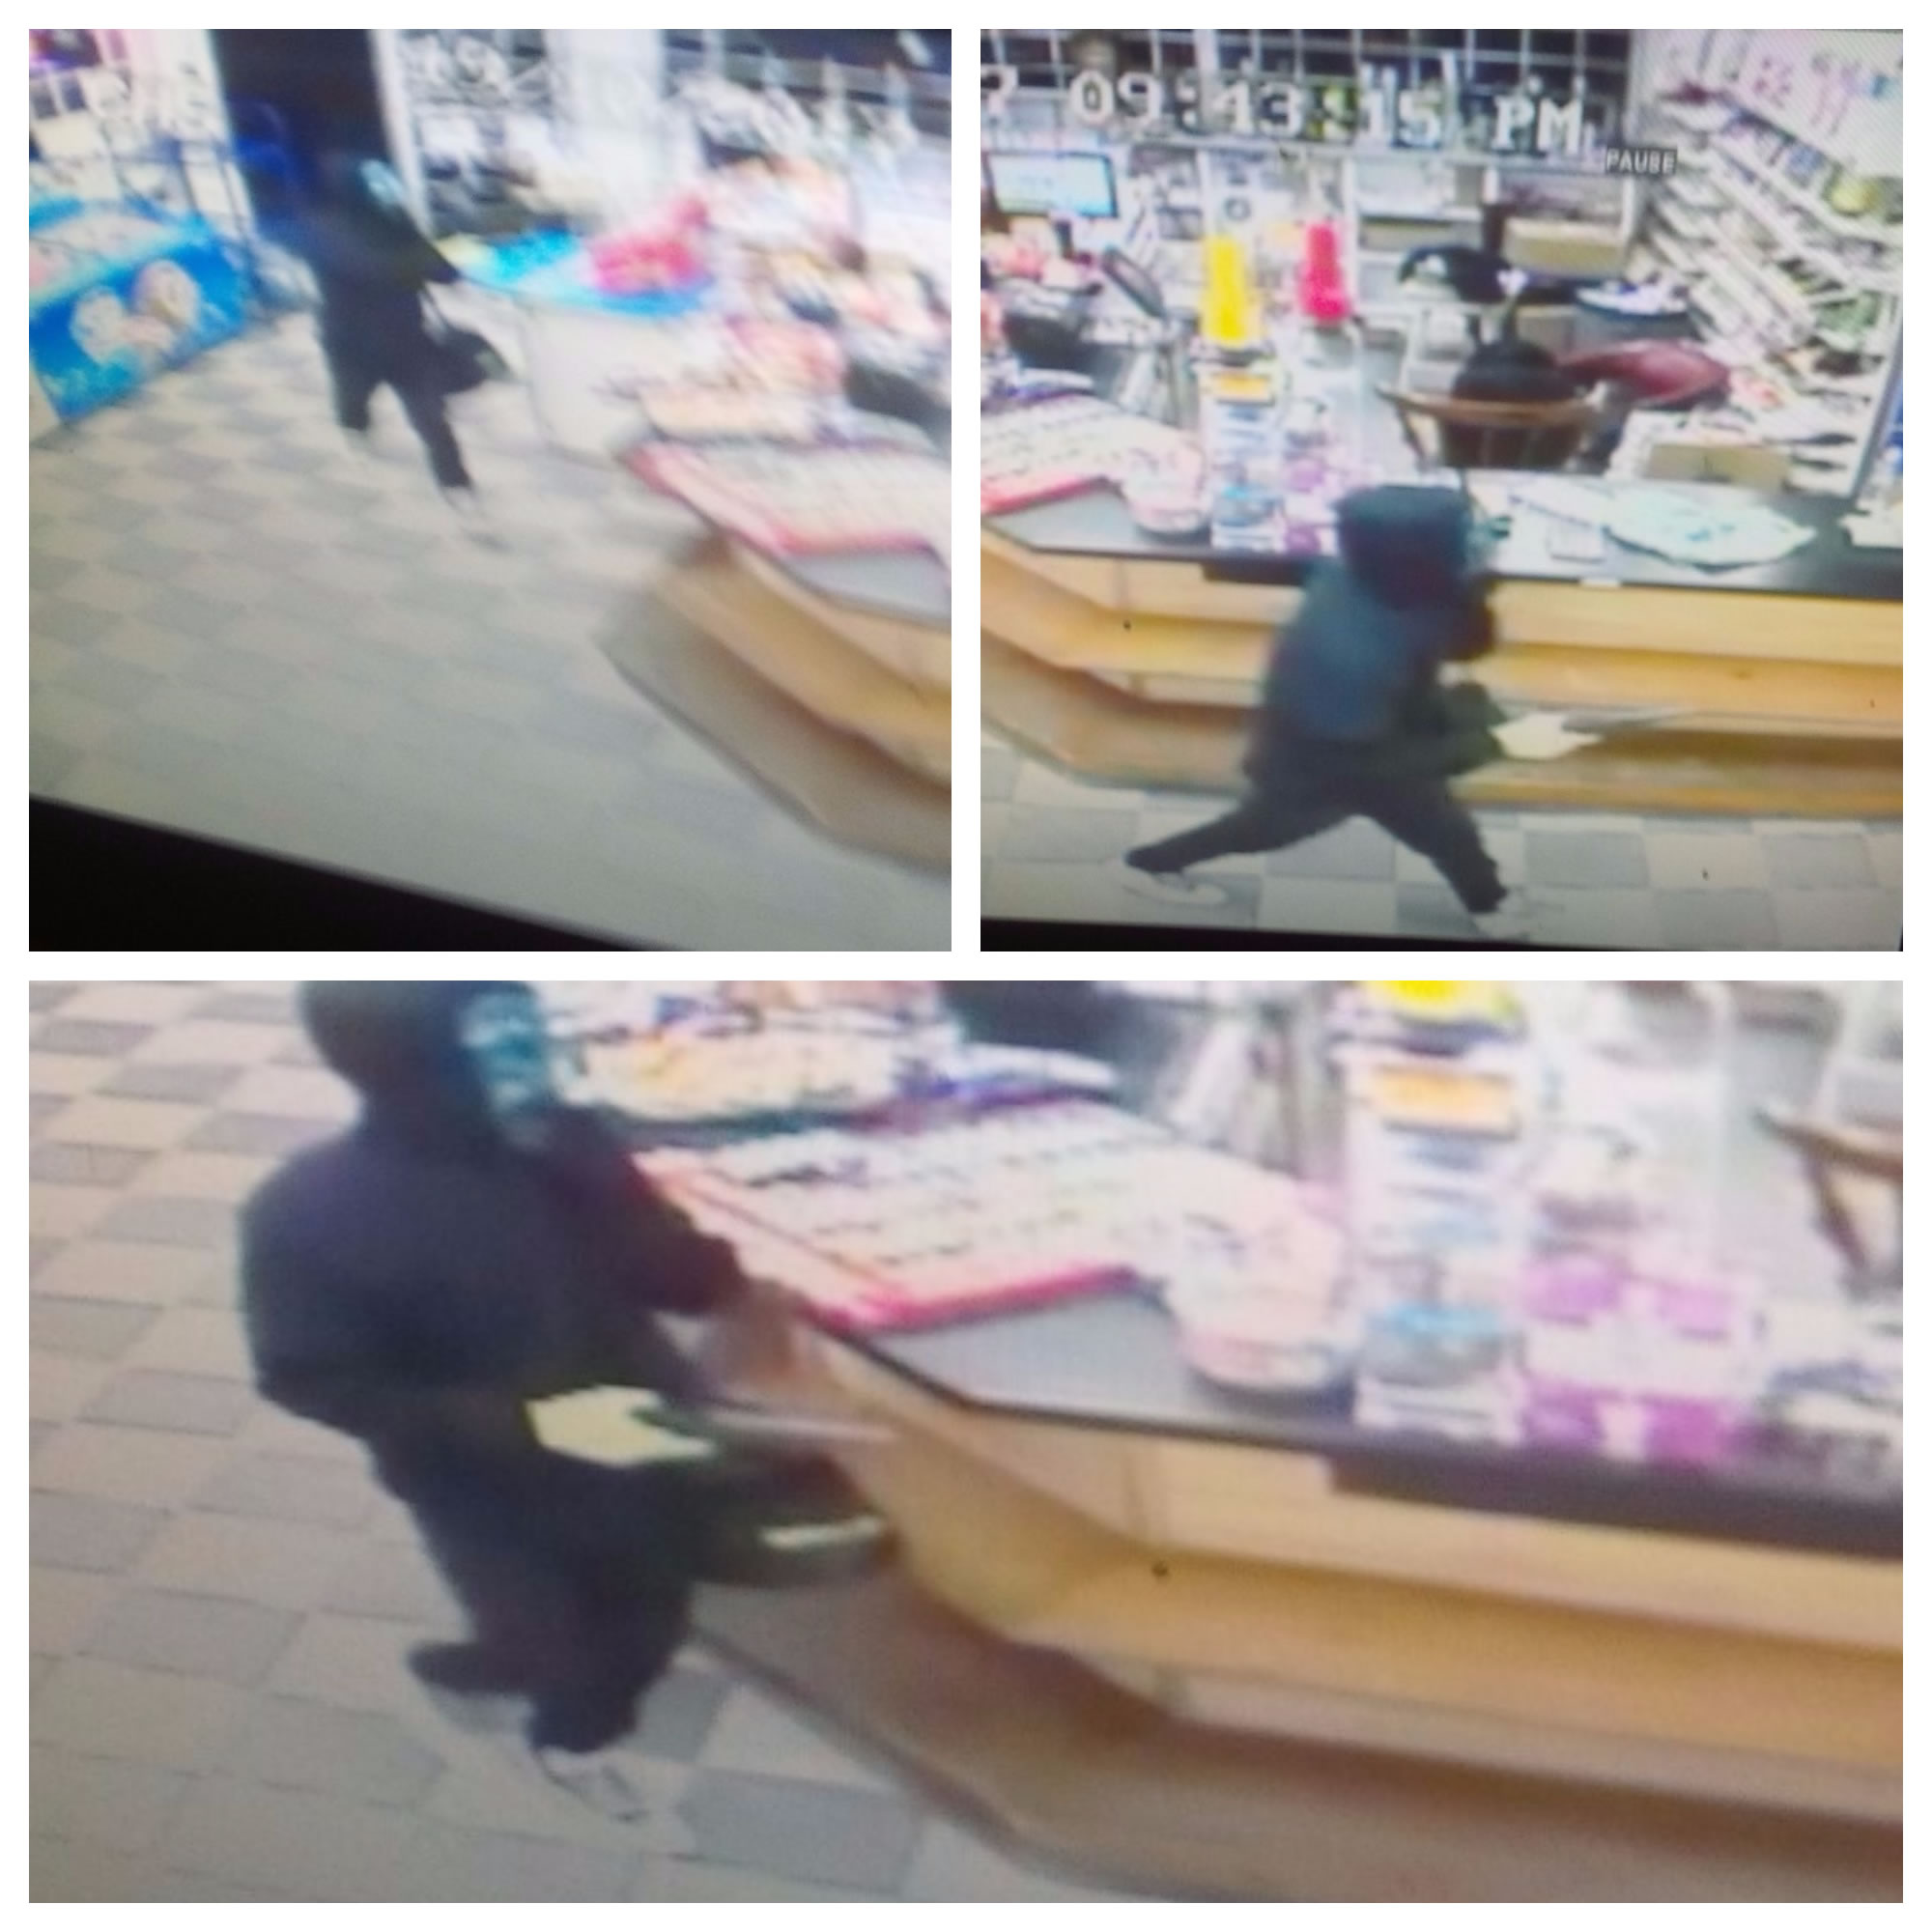 Police seek public assistance to find robbery suspect 